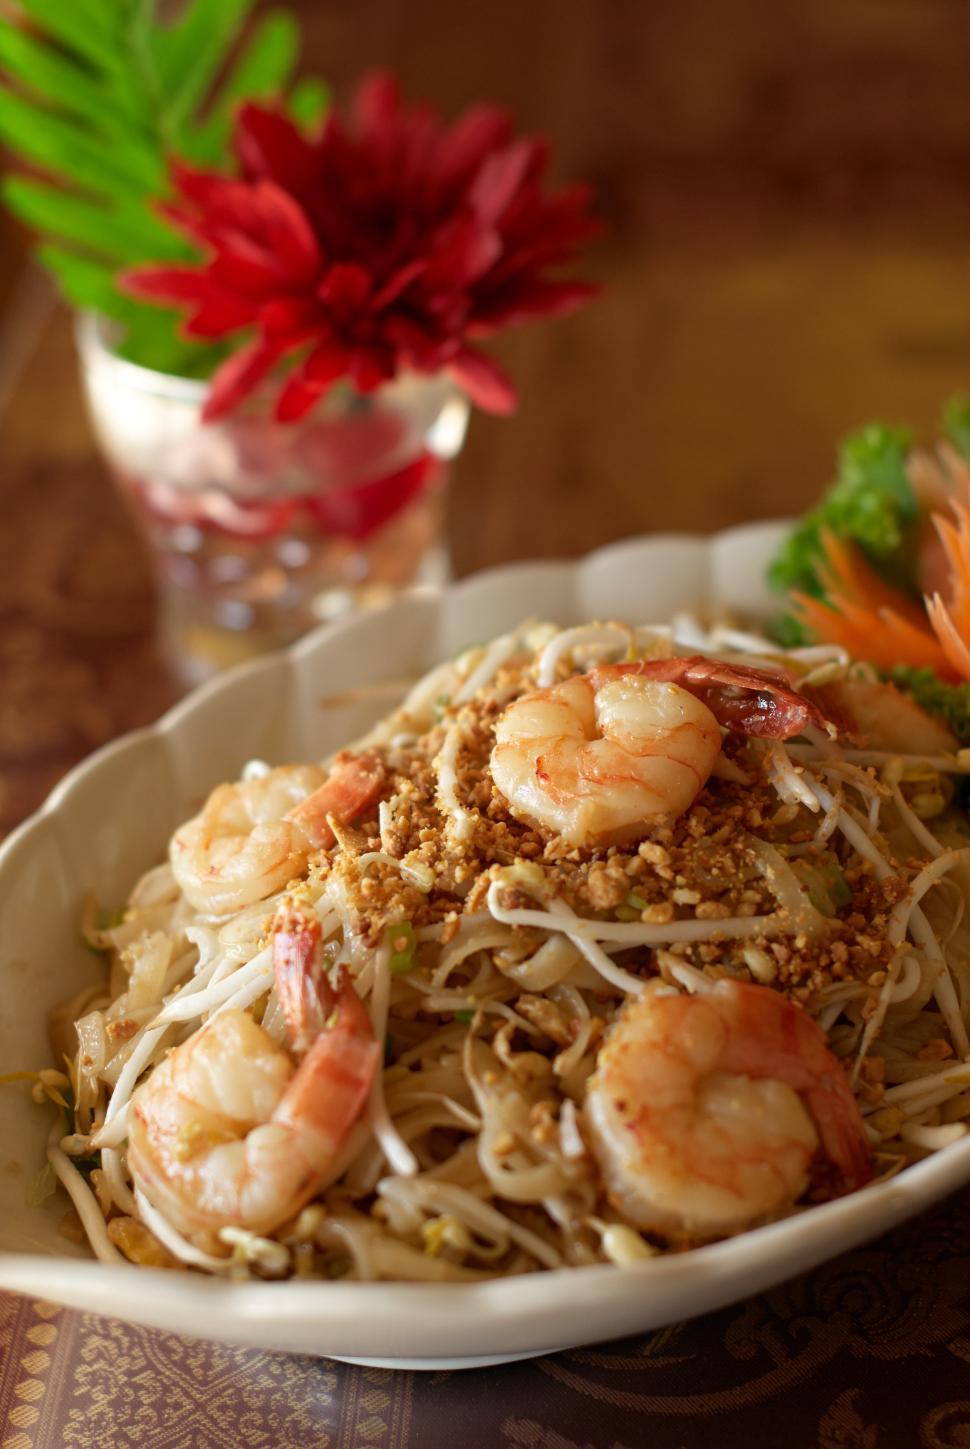 Free Image of A bowl of shrimp and noodles 